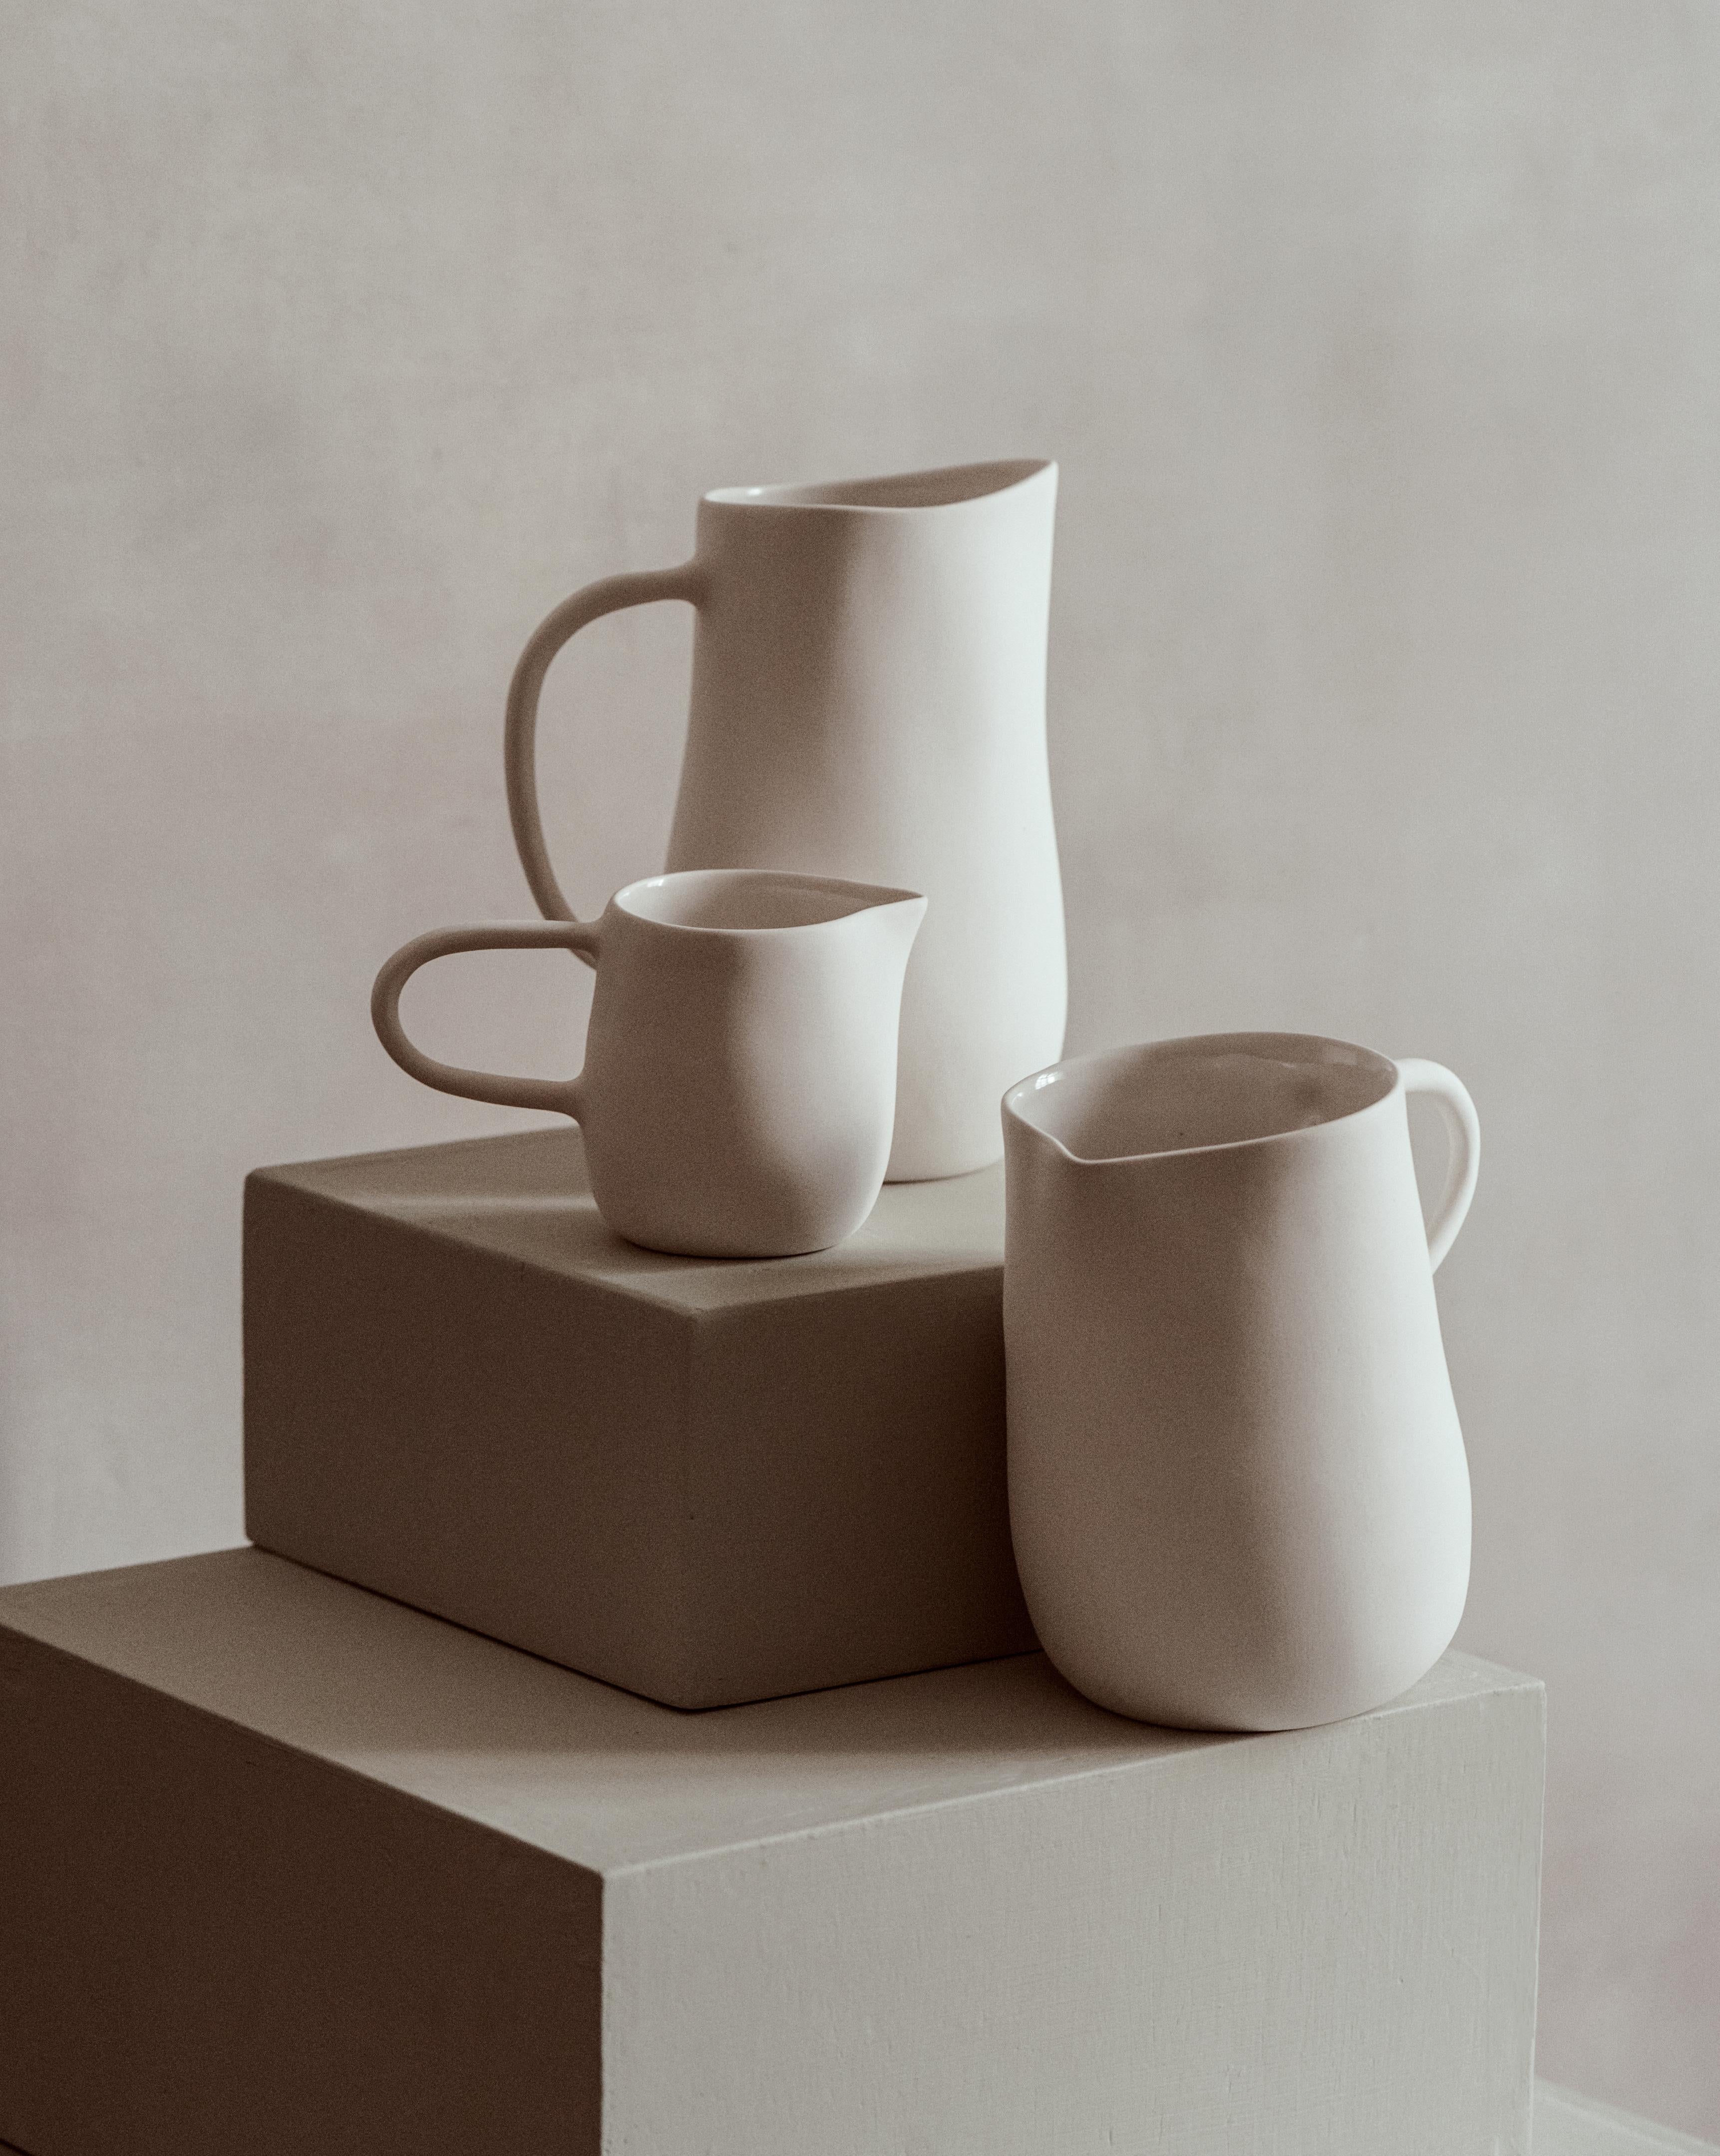 Set of 3 The Family Jug by Kilzi
Dimensions: Mum jug: D 16.5 x W 11 x H 20.9 cm.
Dad jug: D 16.9 x W 12 x H 17.3 cm.
Kid jug: D 15.5 x W 7.2 x H 9.6 cm.
Materials: porcelain with a matte finish on the outside, and transparent shiny glaze on the